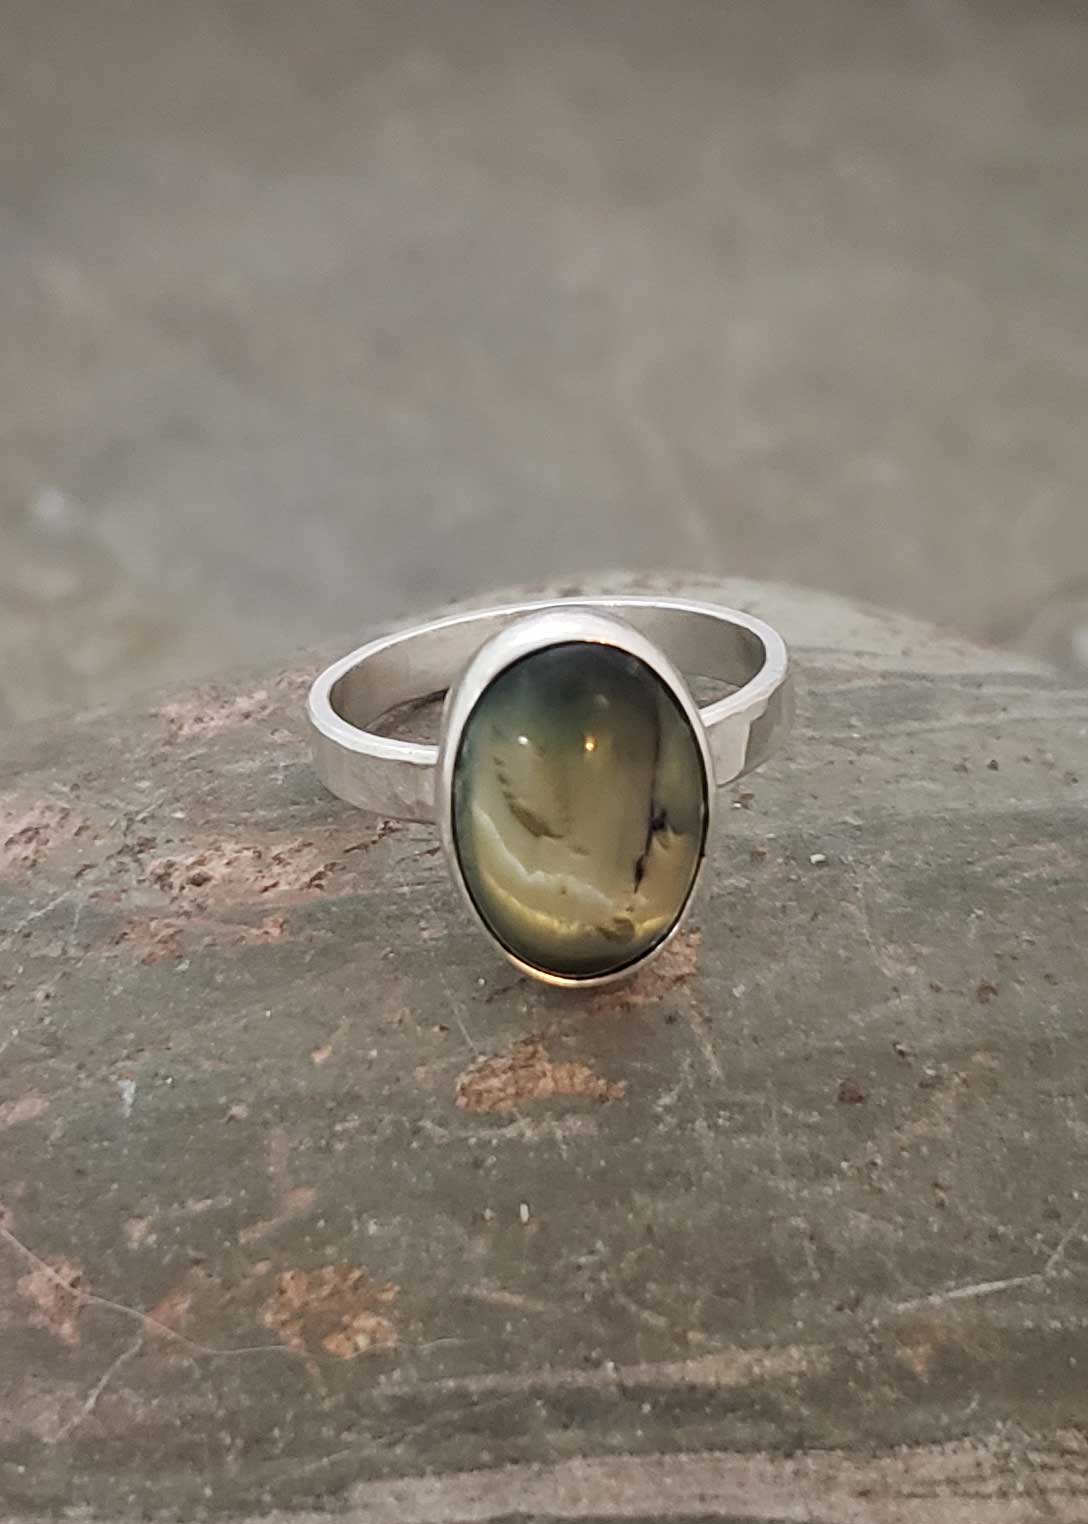 glow of olive green is captured in this silver ring, by Dona Miller 